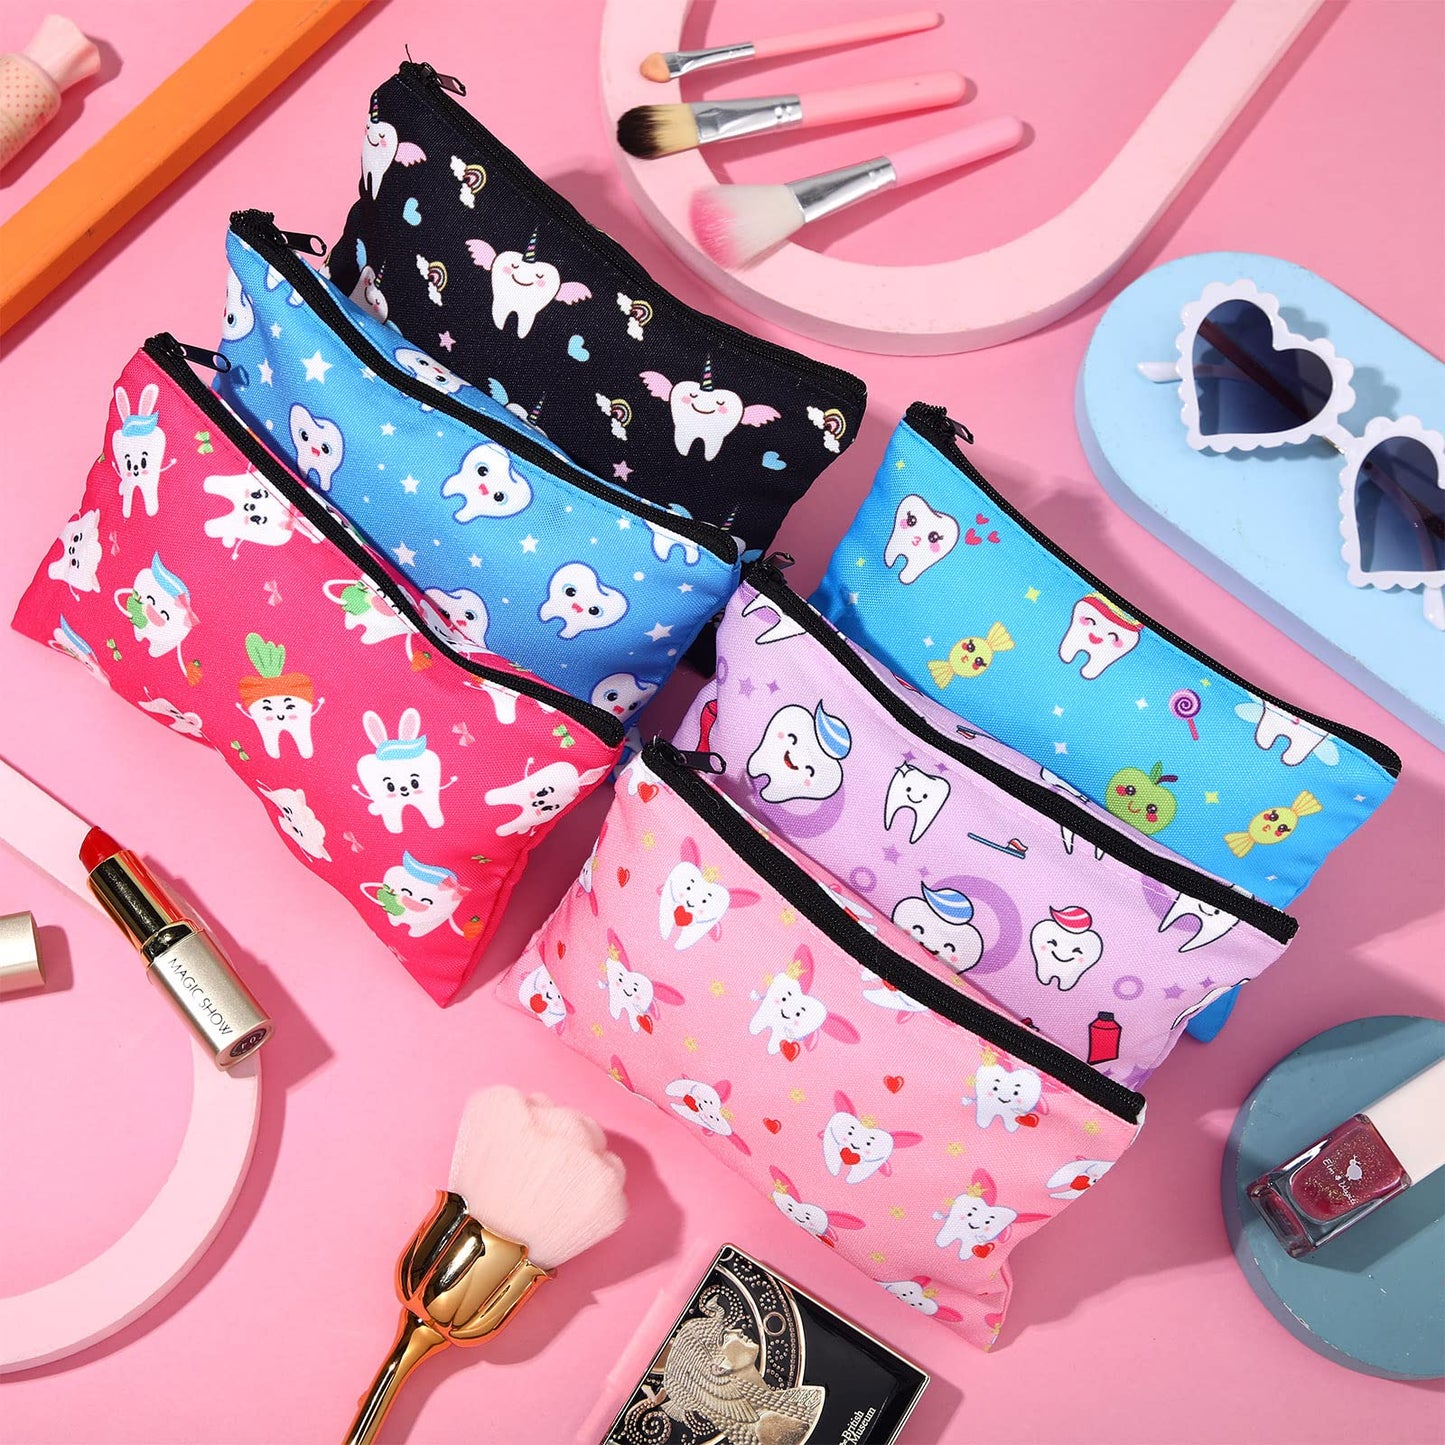 12 Pieces Teeth Makeup Bag Cute Cosmetic Bag for Nurse Women Dental Dentist Gift Colorful Toiletry Bag Multifunctional Polyester Bag with Zipper Teeth Printed Accessories (7.09 x 4.33 Inch)